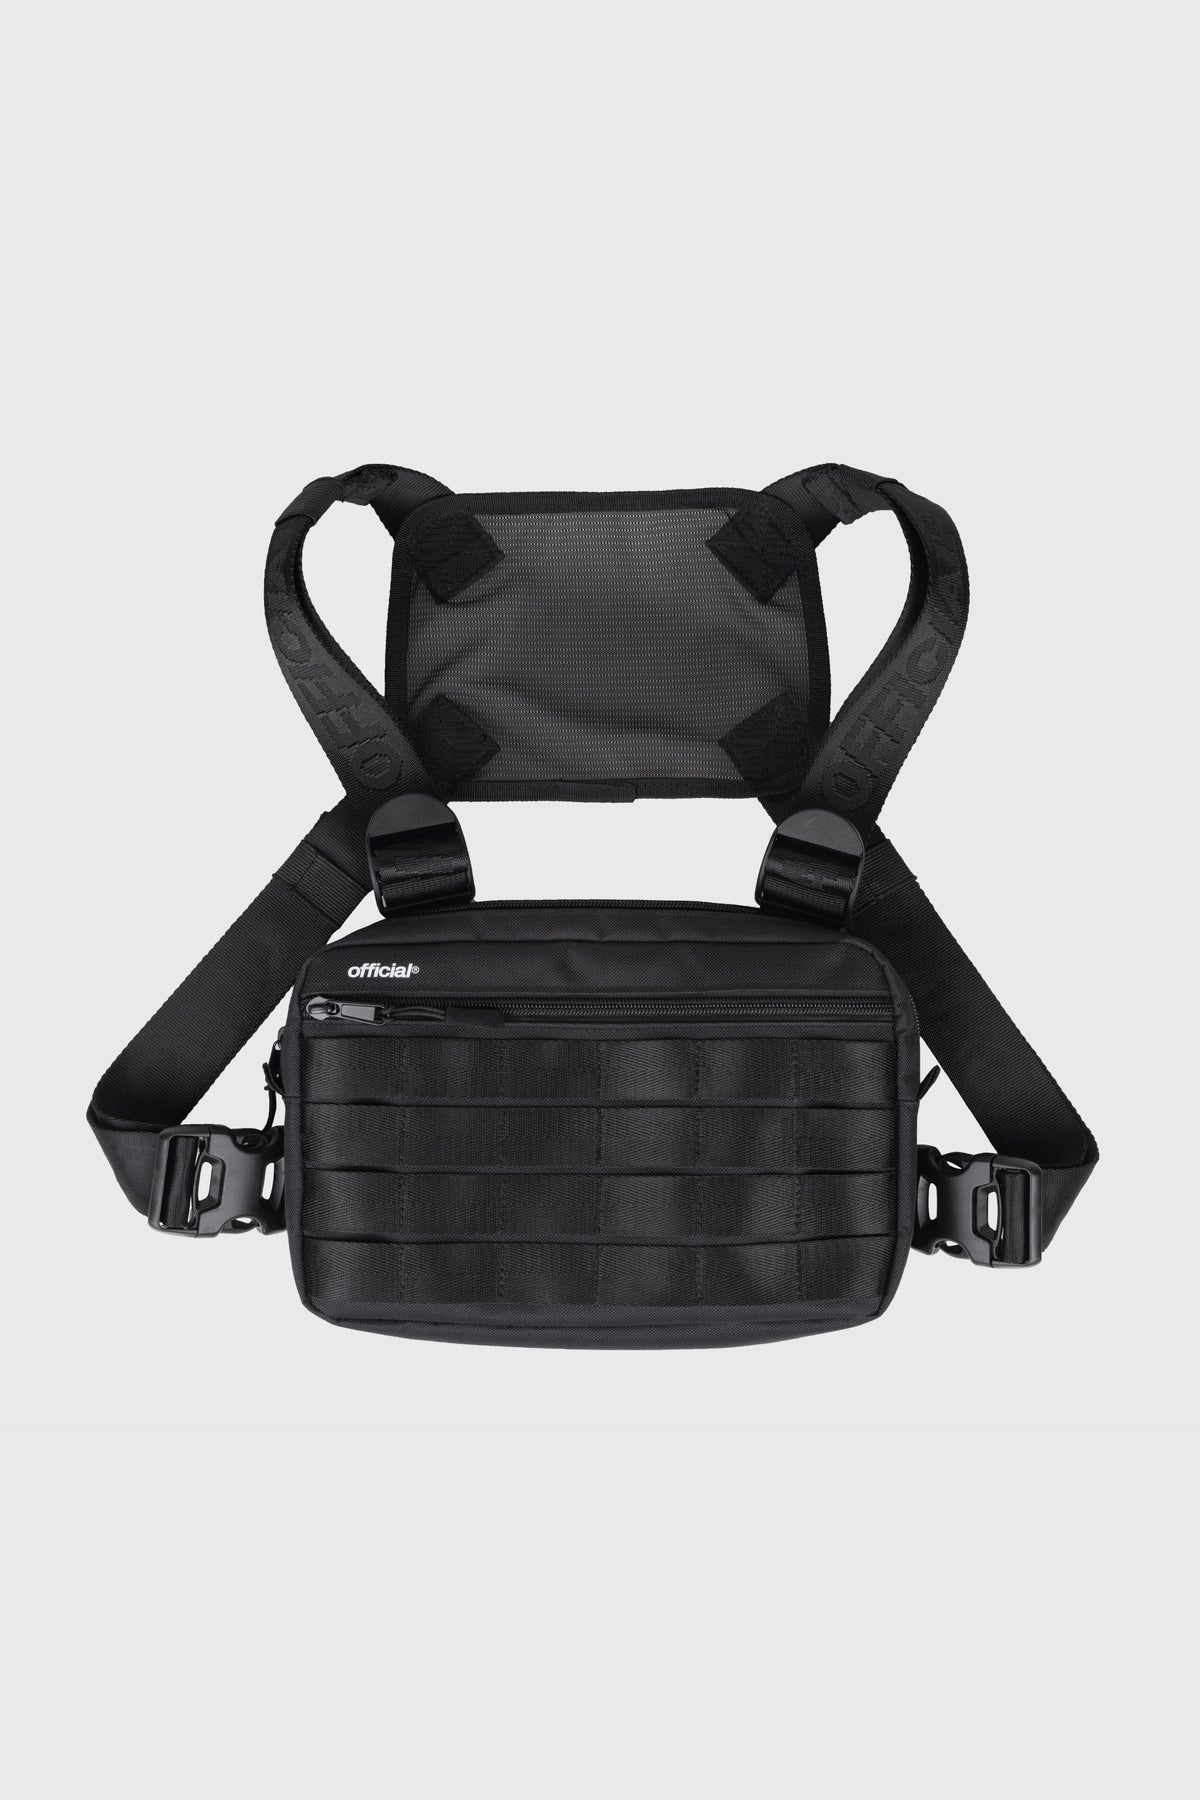 Essential Tri-Strap Chest Bag (Black) – The Official Brand